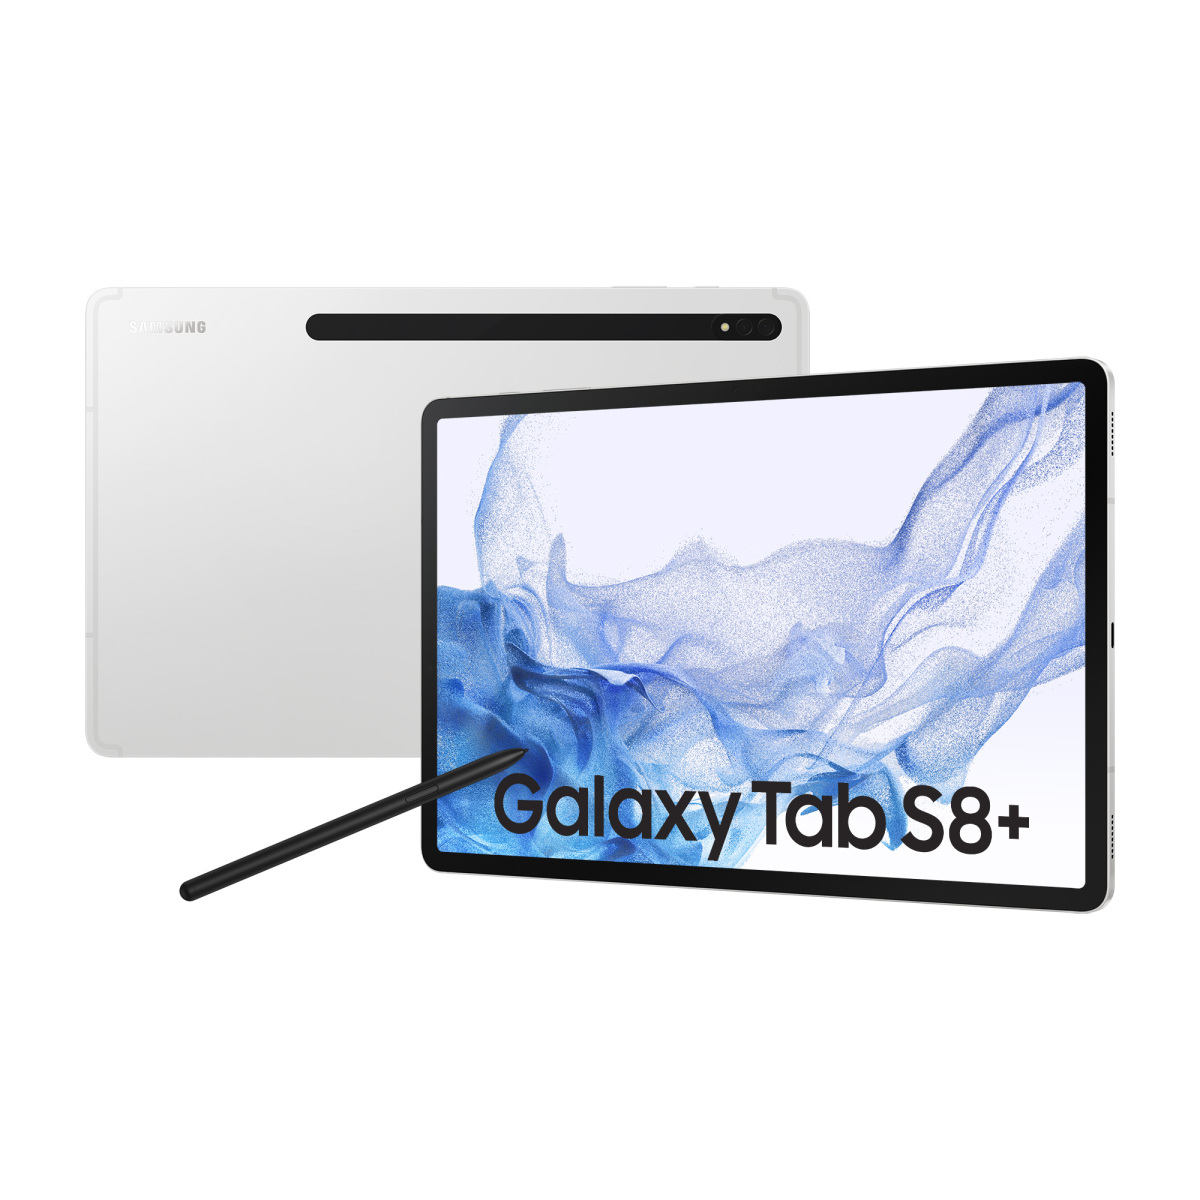 Samsung - Tablette Tactile Samsung Galaxy Tab S8+ 128Go Argent - WiFi -  Tablette Android - Rue du Commerce